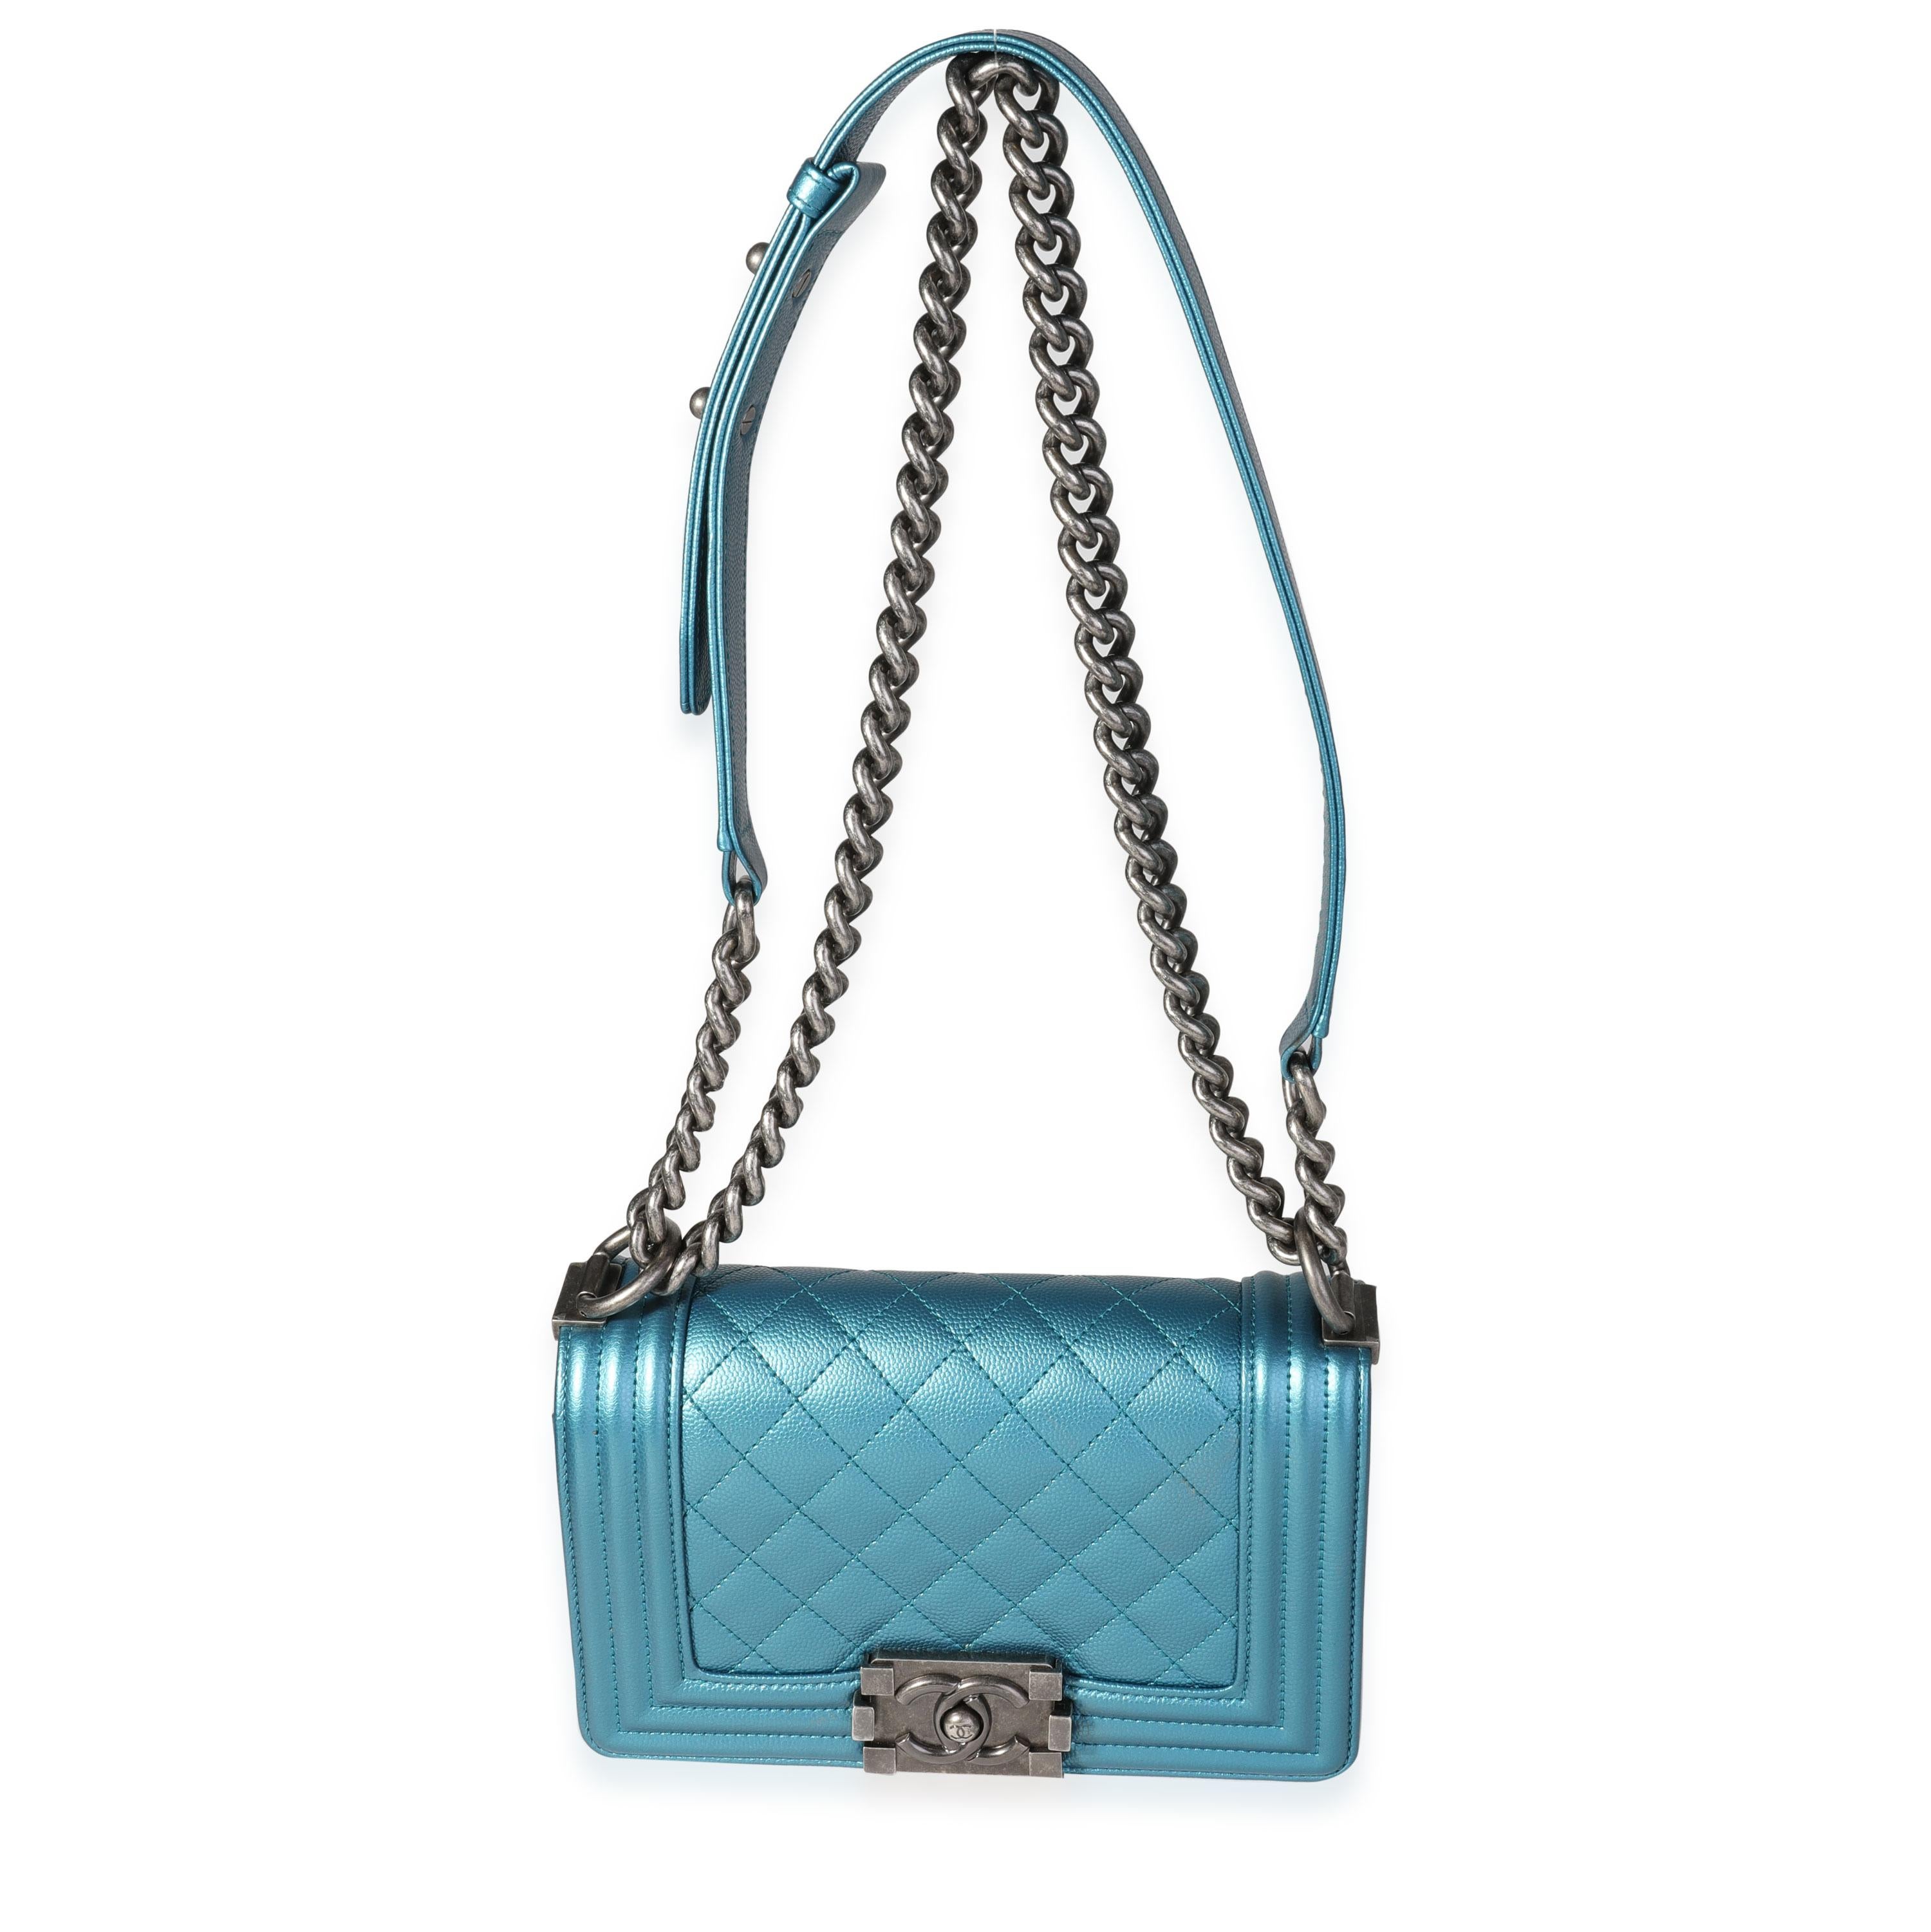 Listing Title: Chanel Blue Metallic Quilted Caviar Small Boy Bag
SKU: 118353
Condition: Pre-owned (3000)
Handbag Condition: Very Good
Condition Comments: Interior stains
Brand: Chanel
Model: Boy bag
Origin Country: France
Handbag Silhouette: